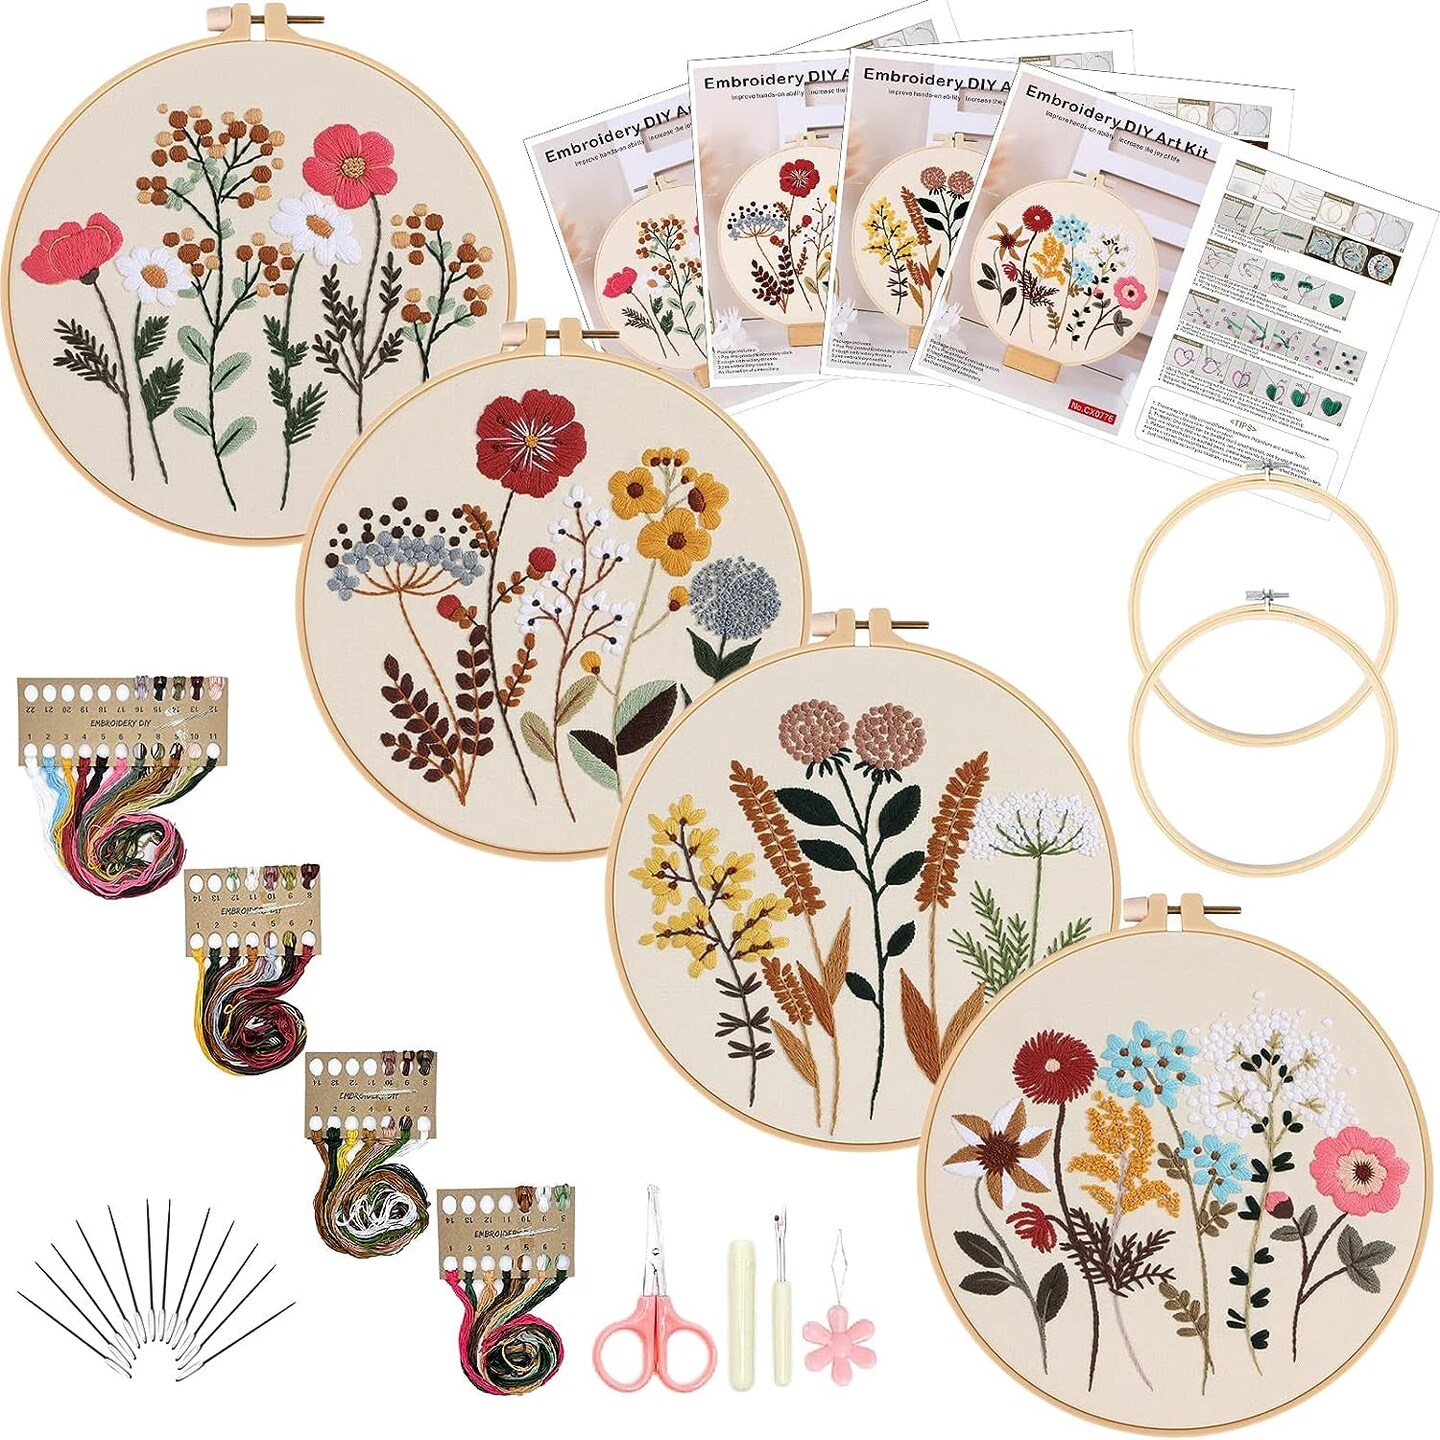 Hi Stone 4 Embroidery Sets for Beginners, DIY Adult Beginner Cross Stitch Kits, 4 Cross Stitch Kits, 2 Embroidery Hoops,Scissors,Needles,Needlepoint